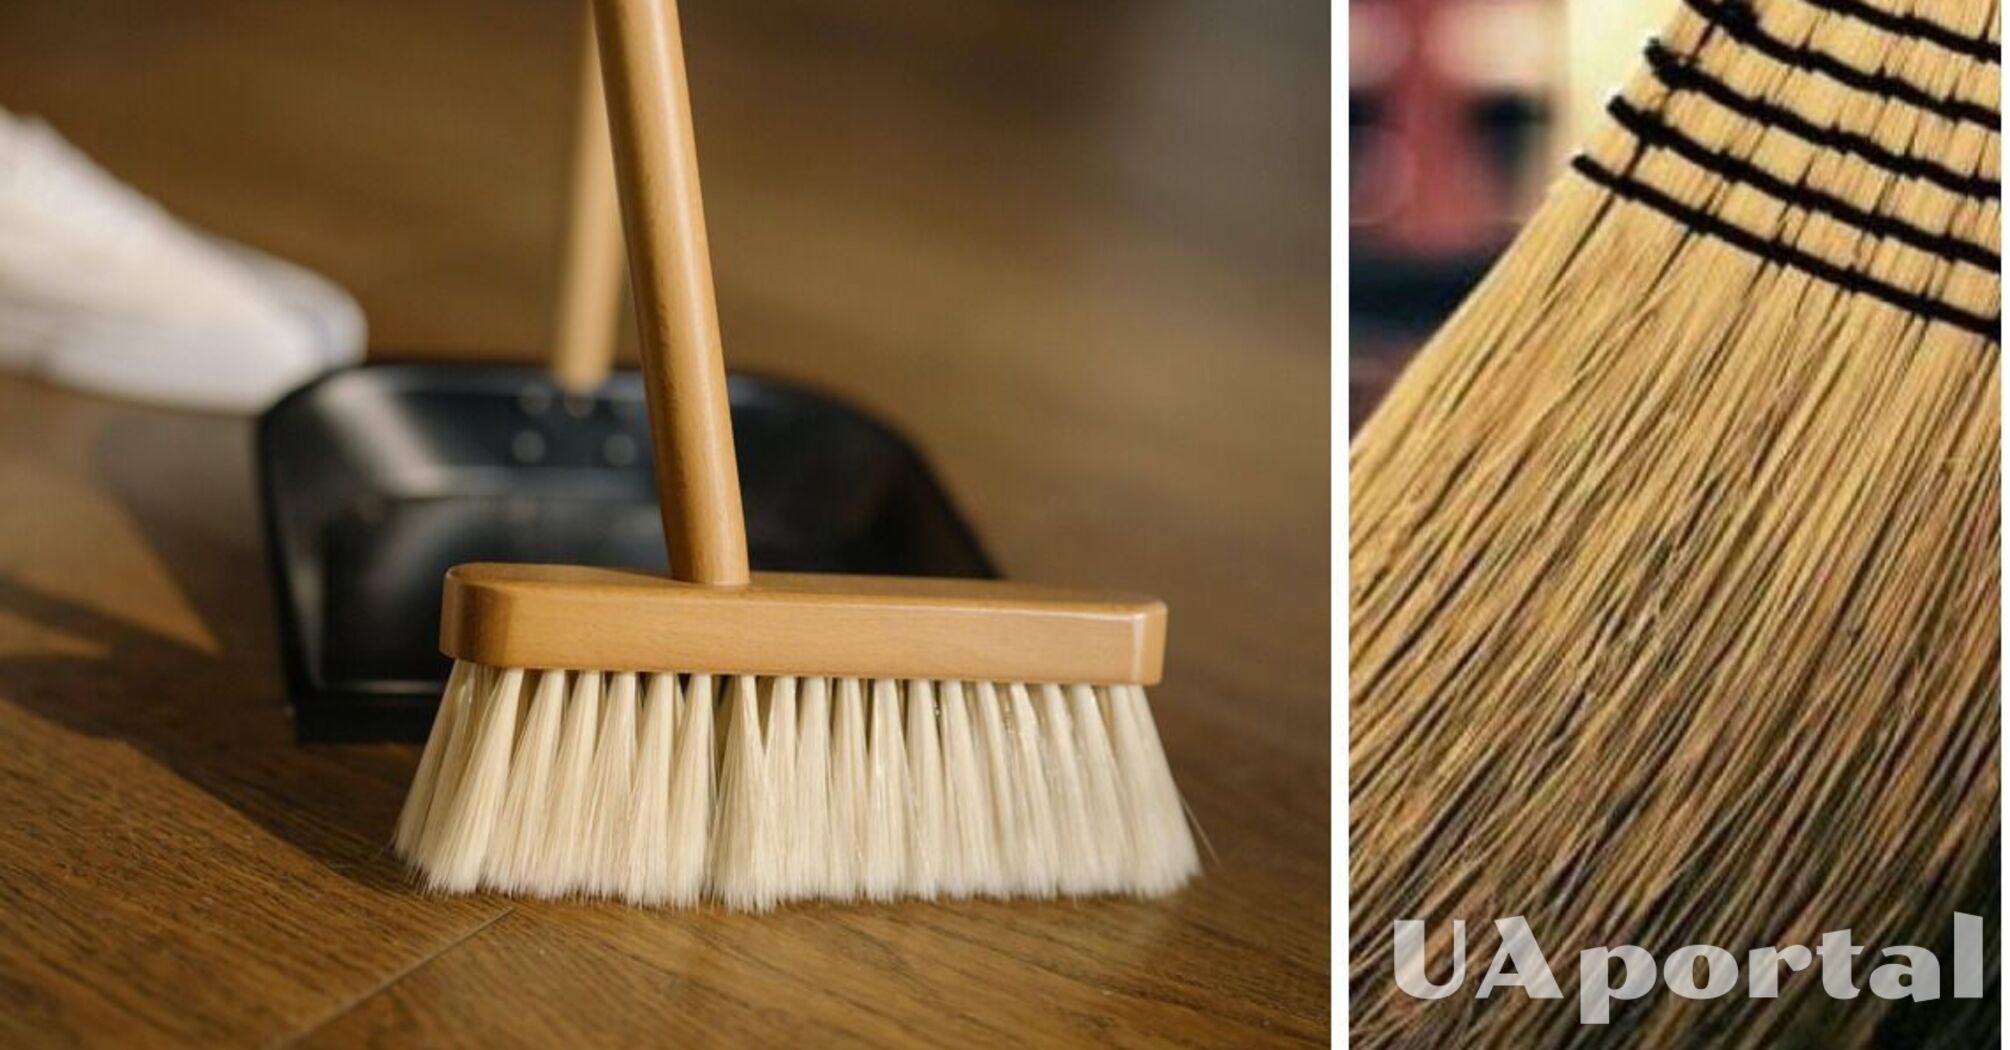 How to properly clean the house with a broom so as not to drive away happiness